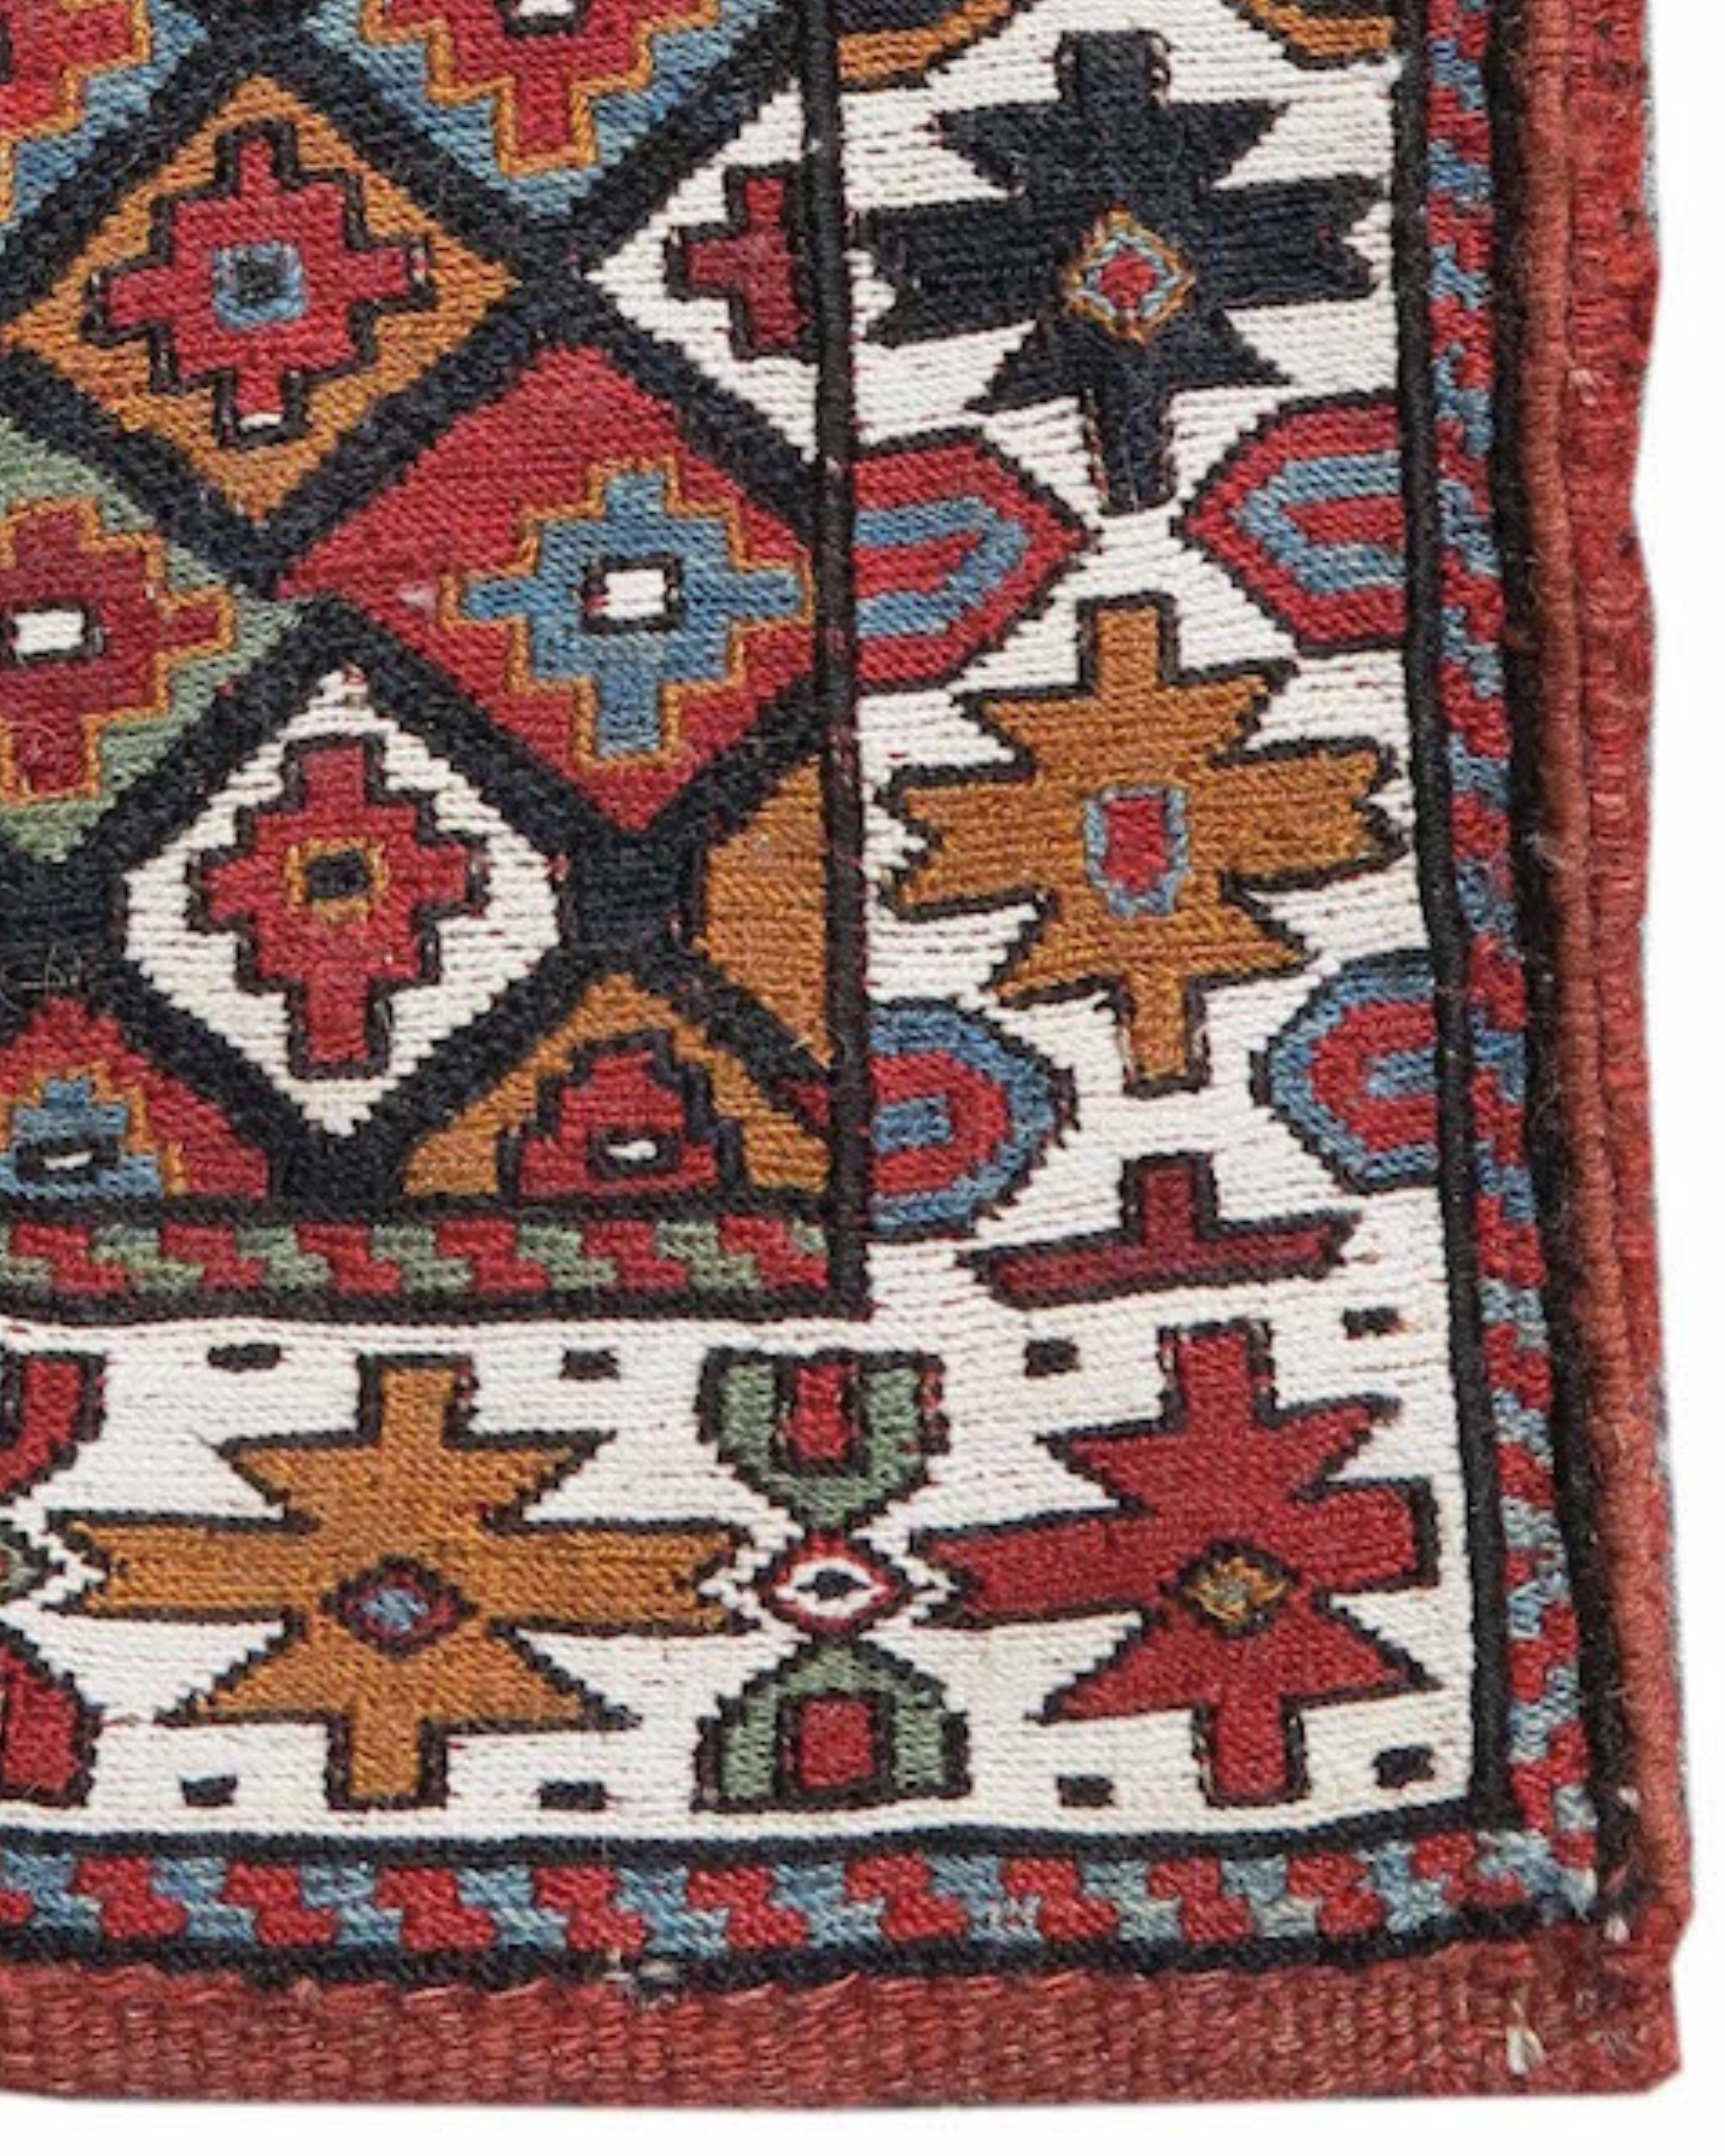 Shahsevan Sumak Chanteh Rug, Late 19th century In Excellent Condition For Sale In San Francisco, CA